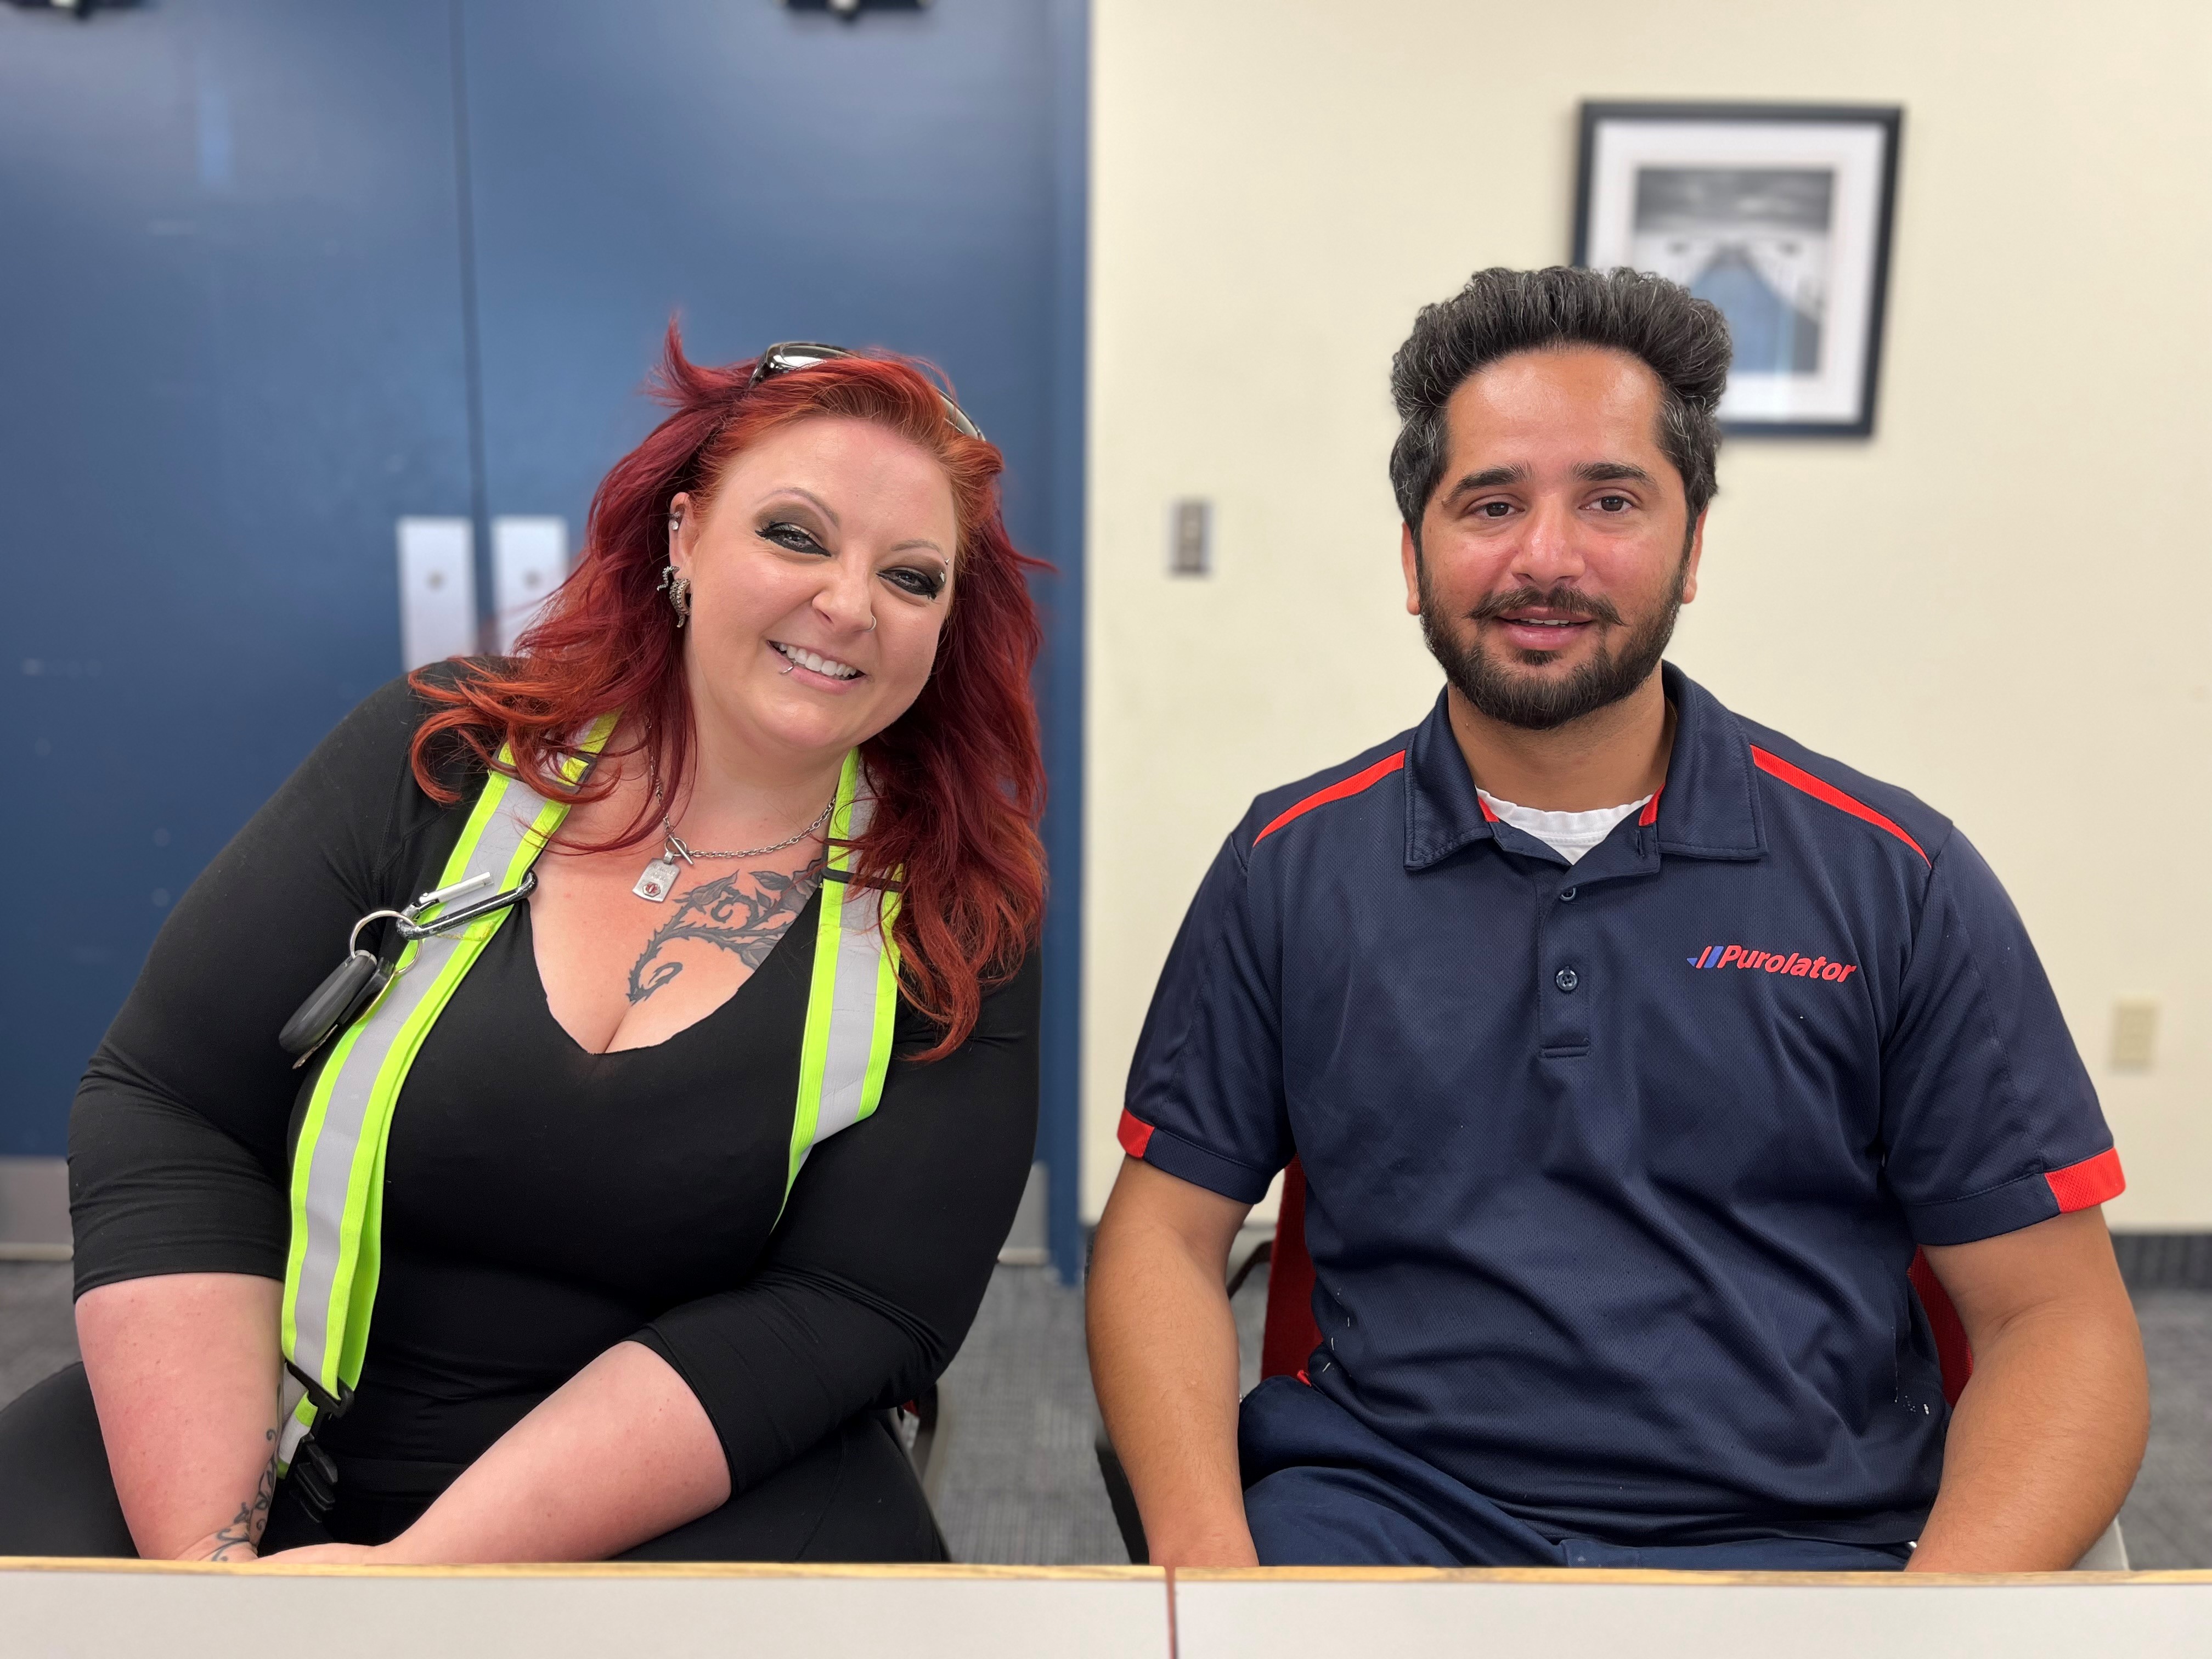 How 2 Ontario Purolator drivers helped rescue a man walking into oncoming highway traffic